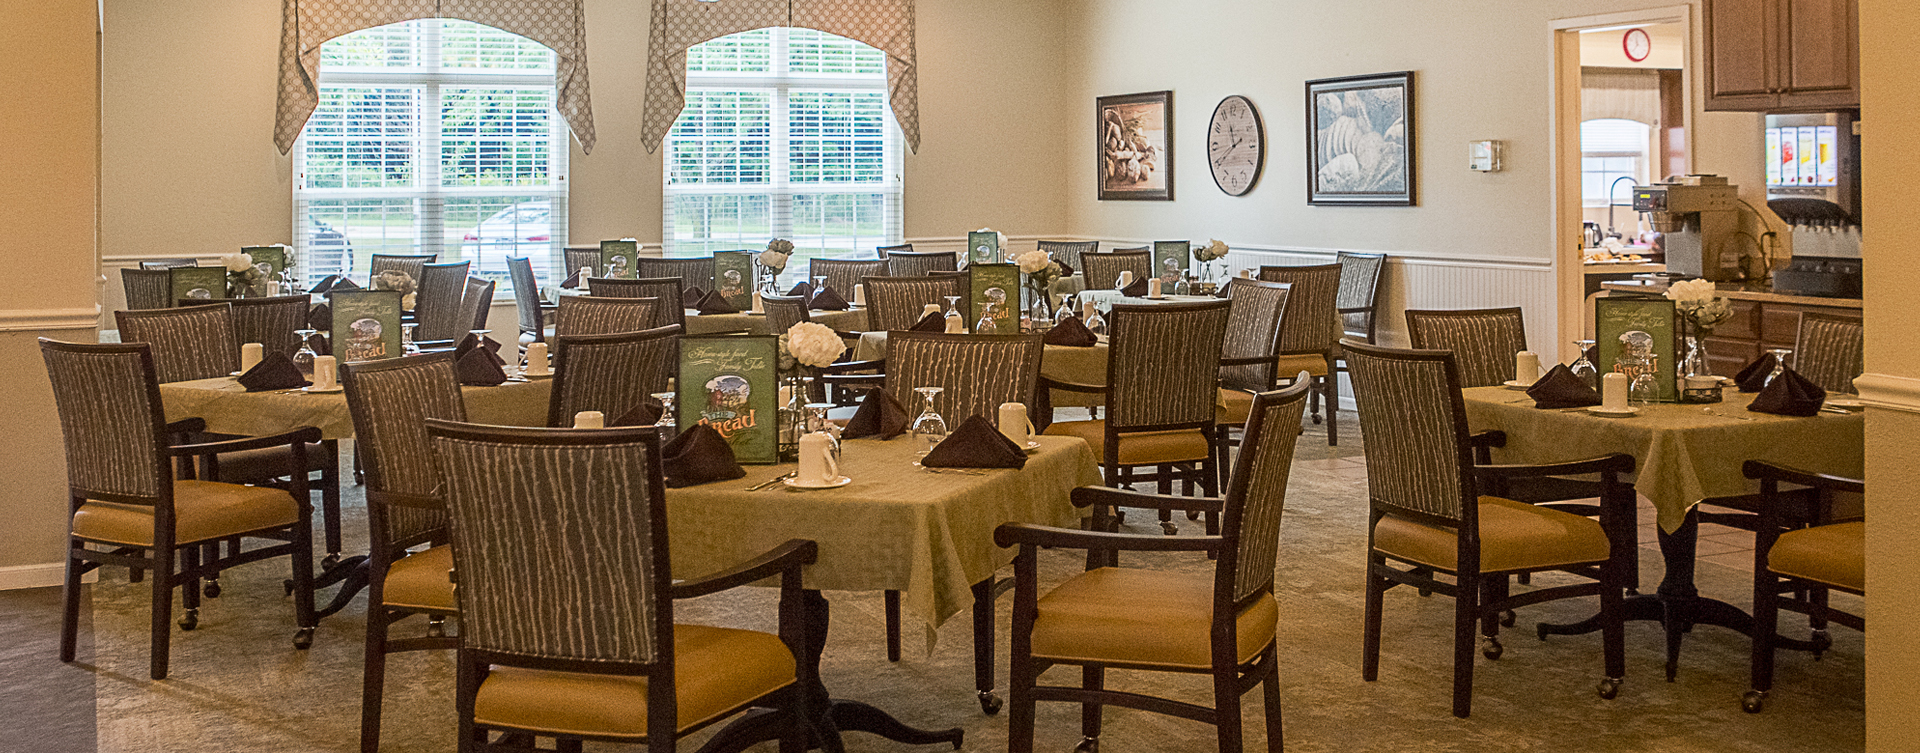 Enjoy restaurant -style meals served three times a day in our dining room at Bickford of Iowa City